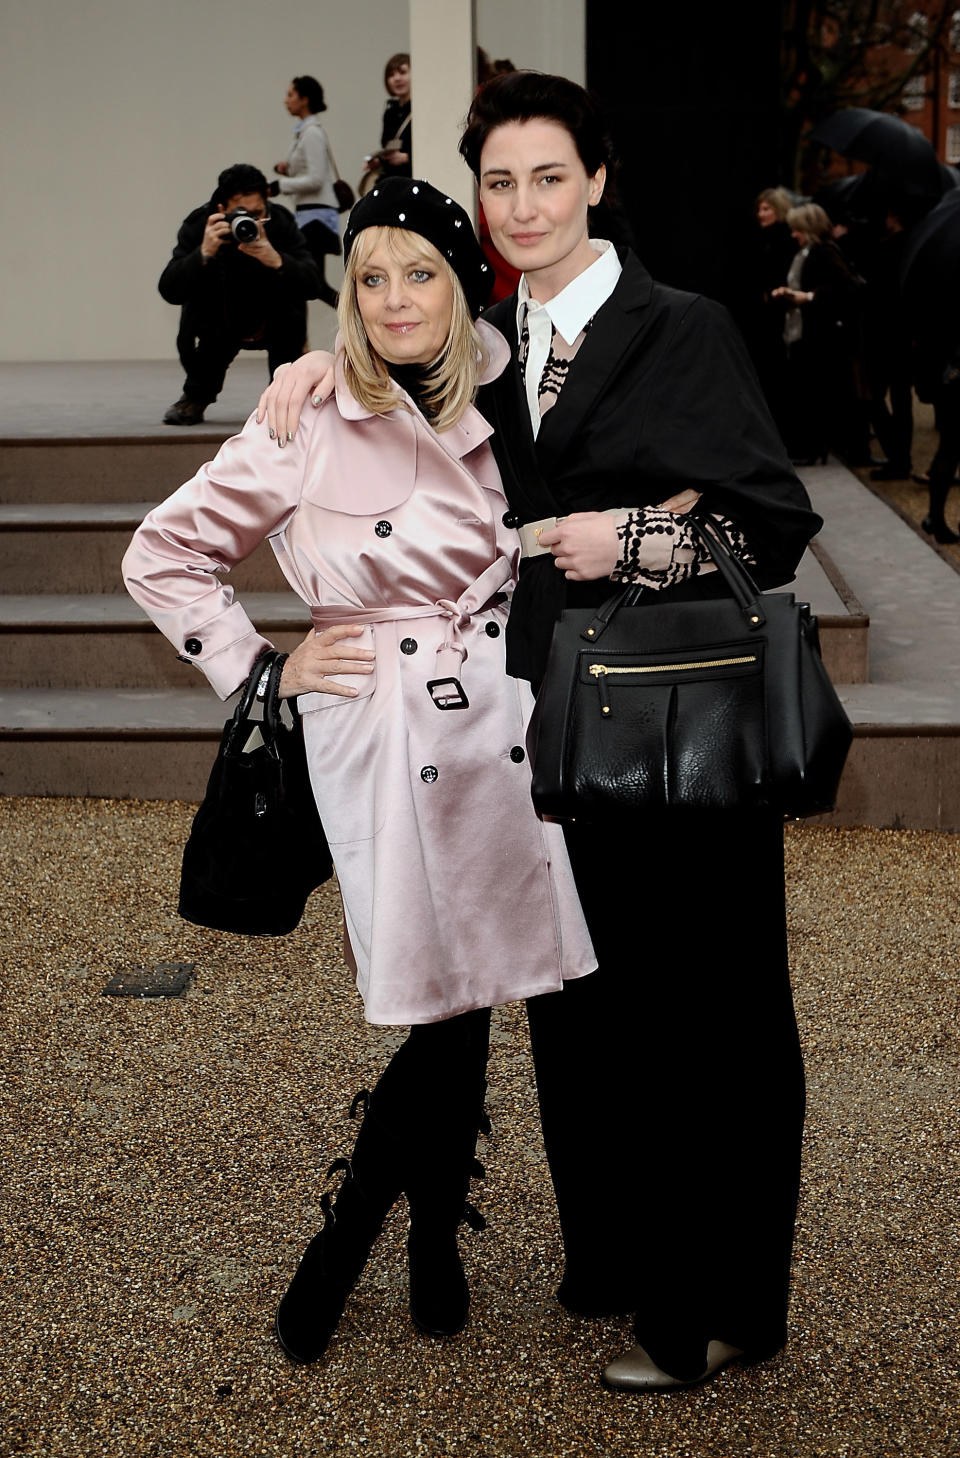 Models Twiggy and Erin O'Connor attend the Burberry Prorsum fall/winter 2010 womenswear show at the Parade Ground at Chelsea College of Art in London.